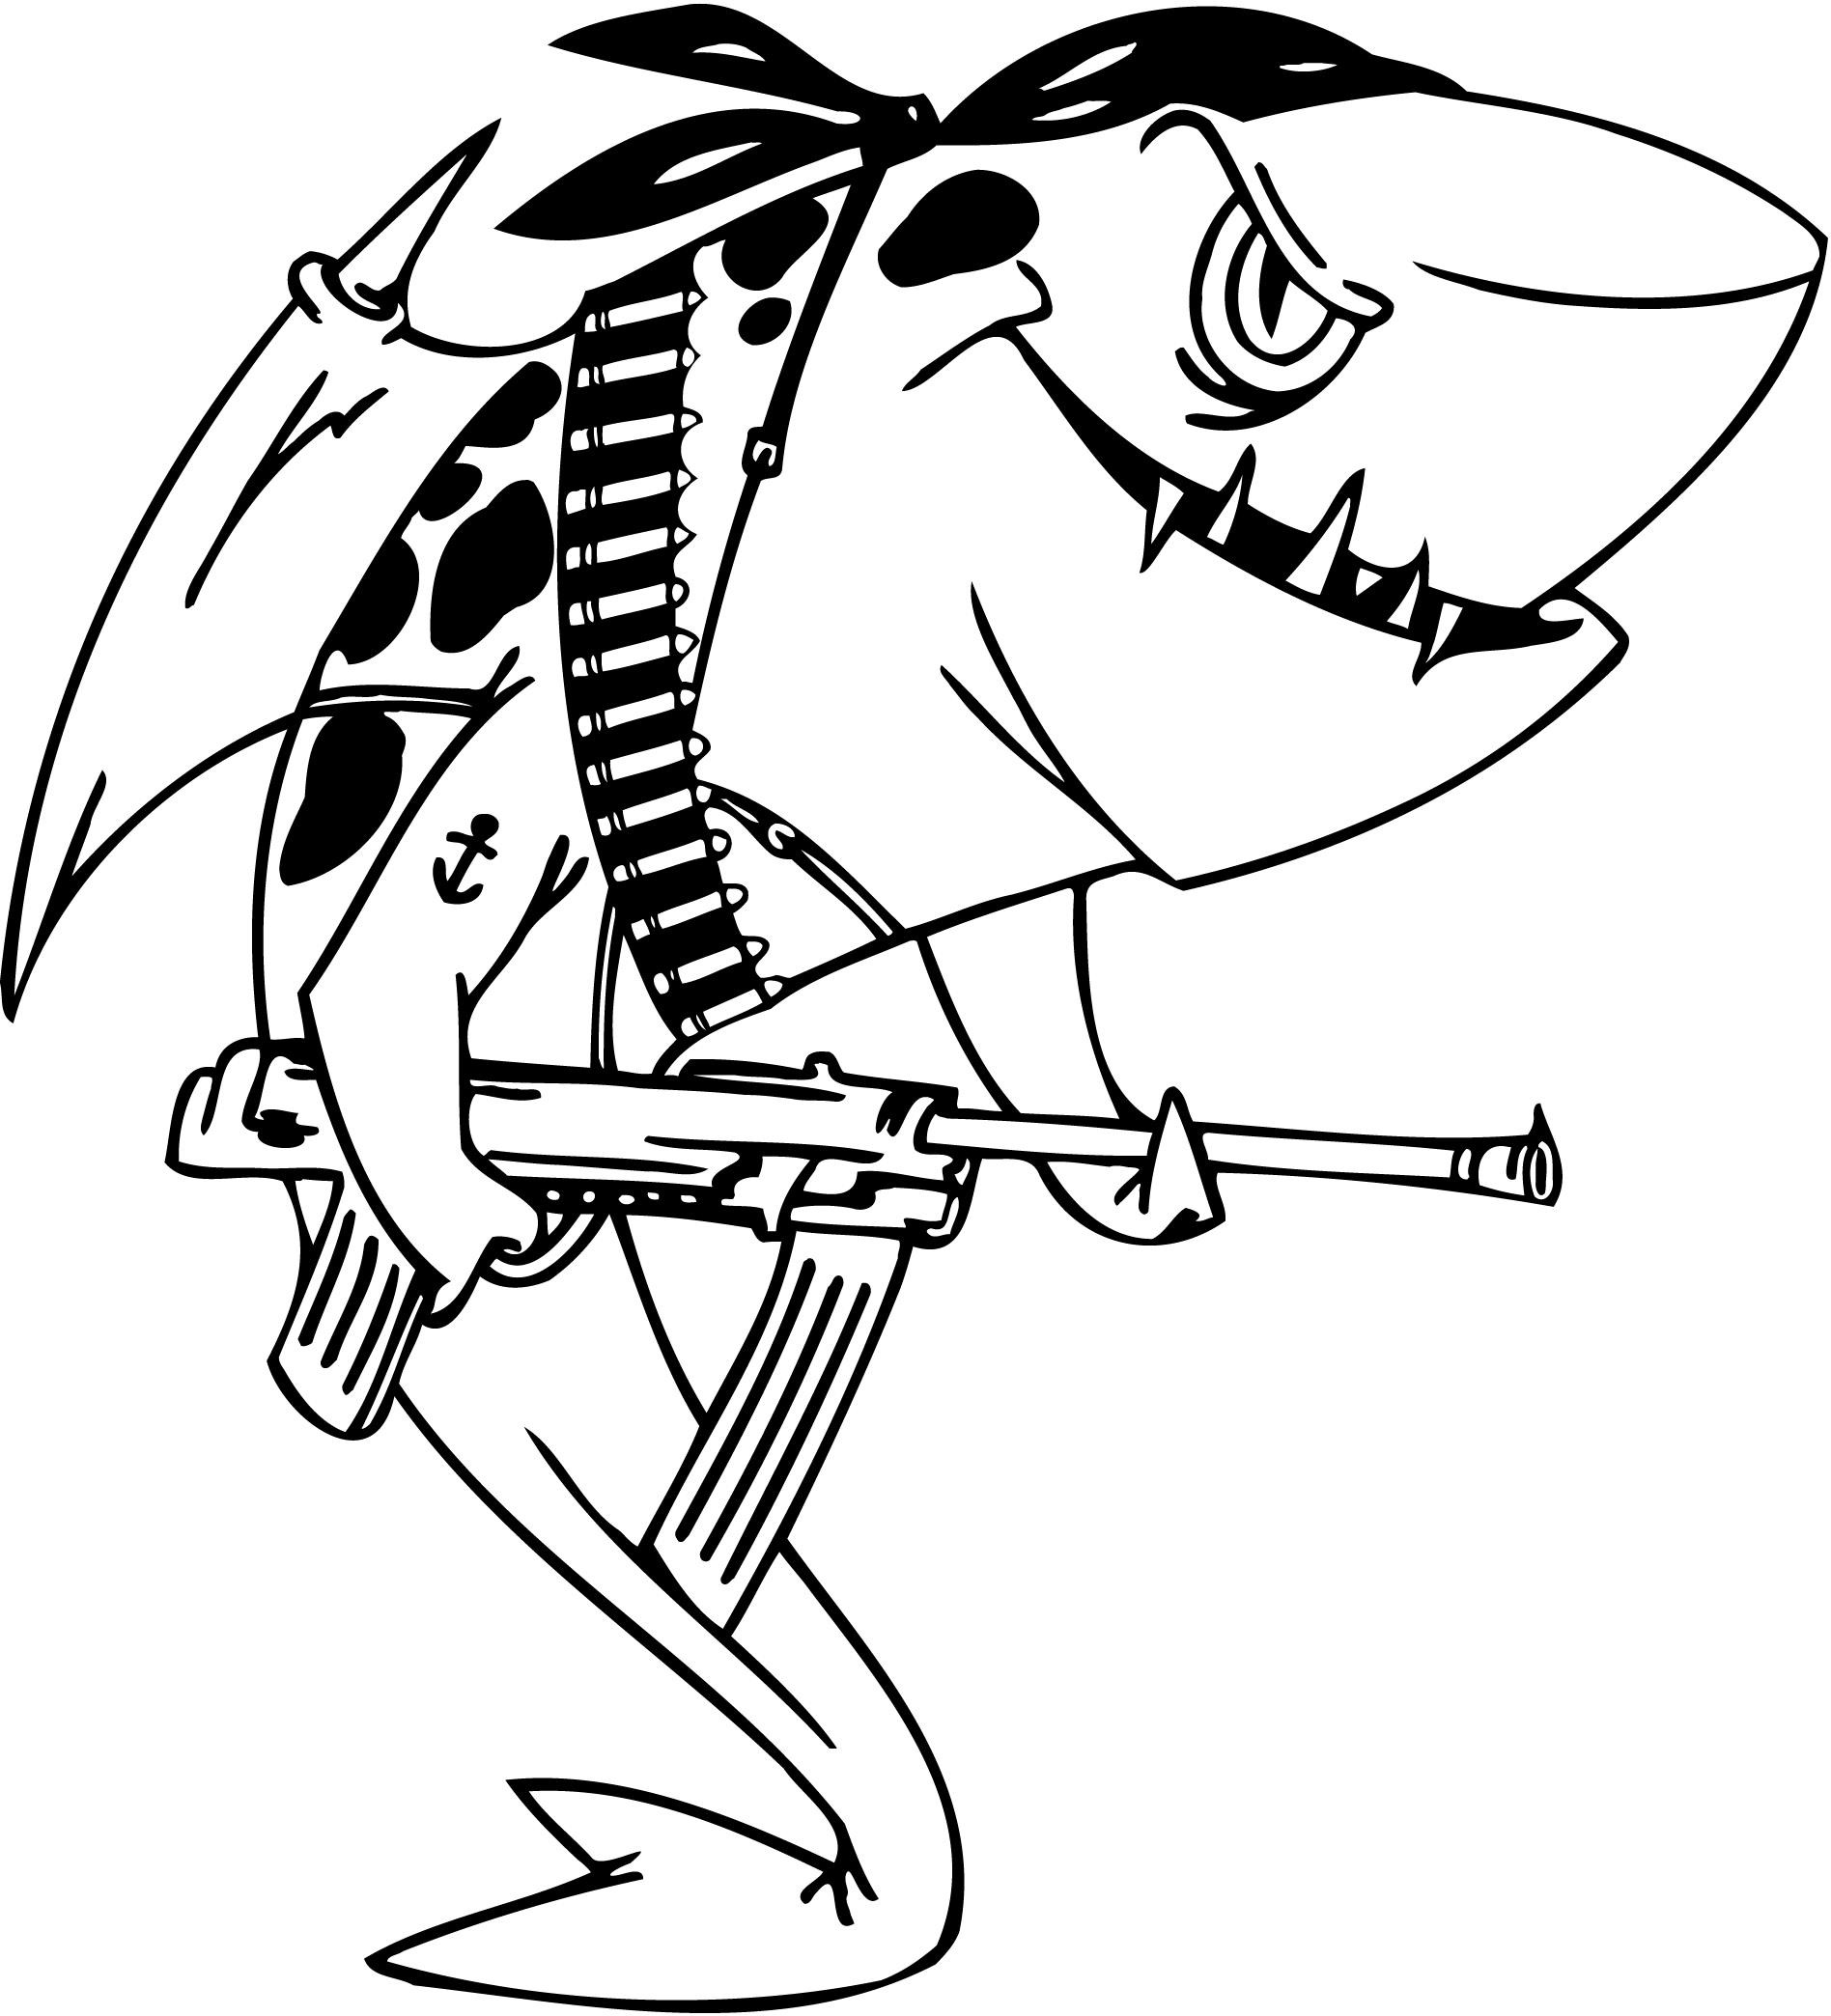 Shark Coloring Sheets For Kids
 printables coloring pages of a military shark for kids